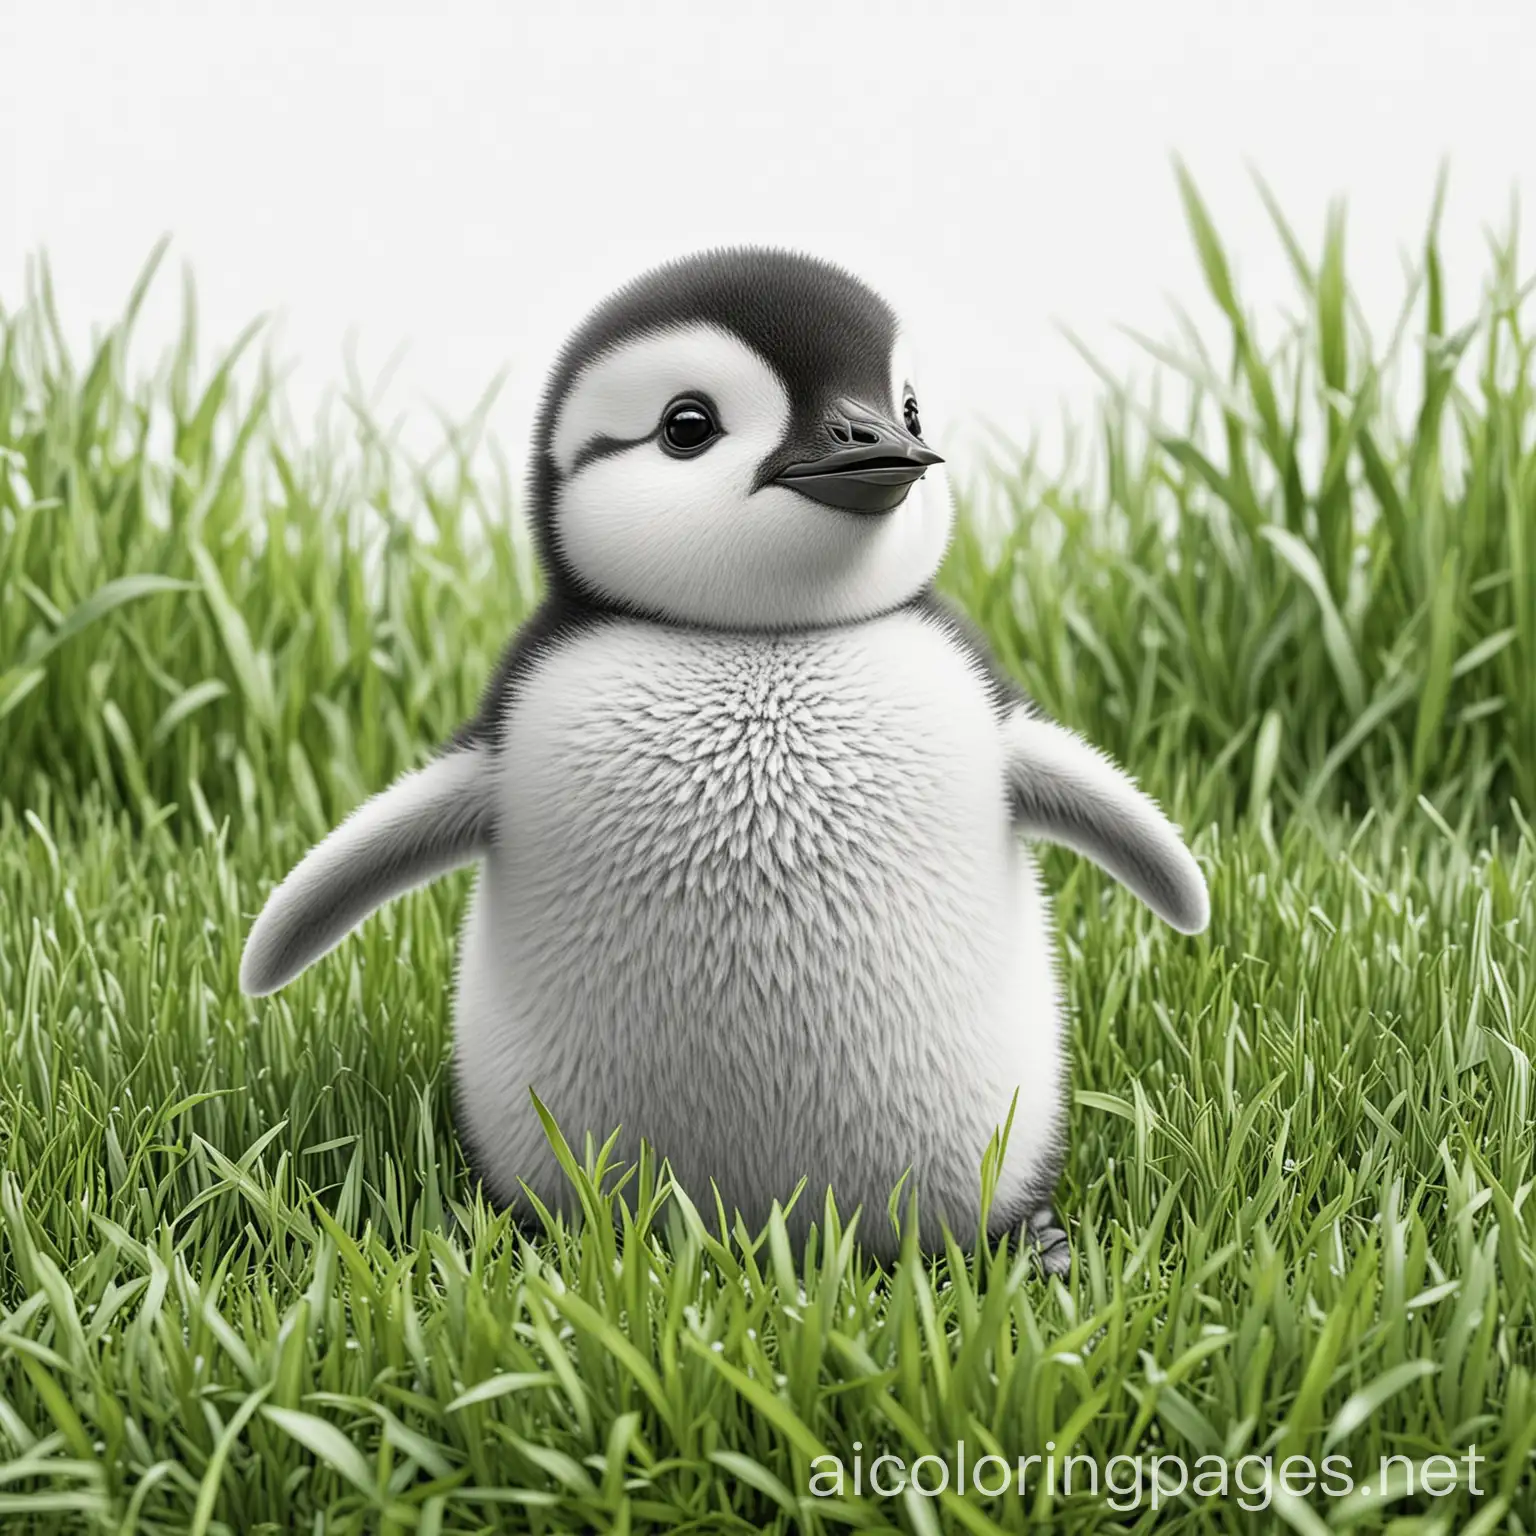 a cute baby penguin playing in green grass having fun, Coloring Page, black and white, line art, white background, Simplicity, Ample White Space